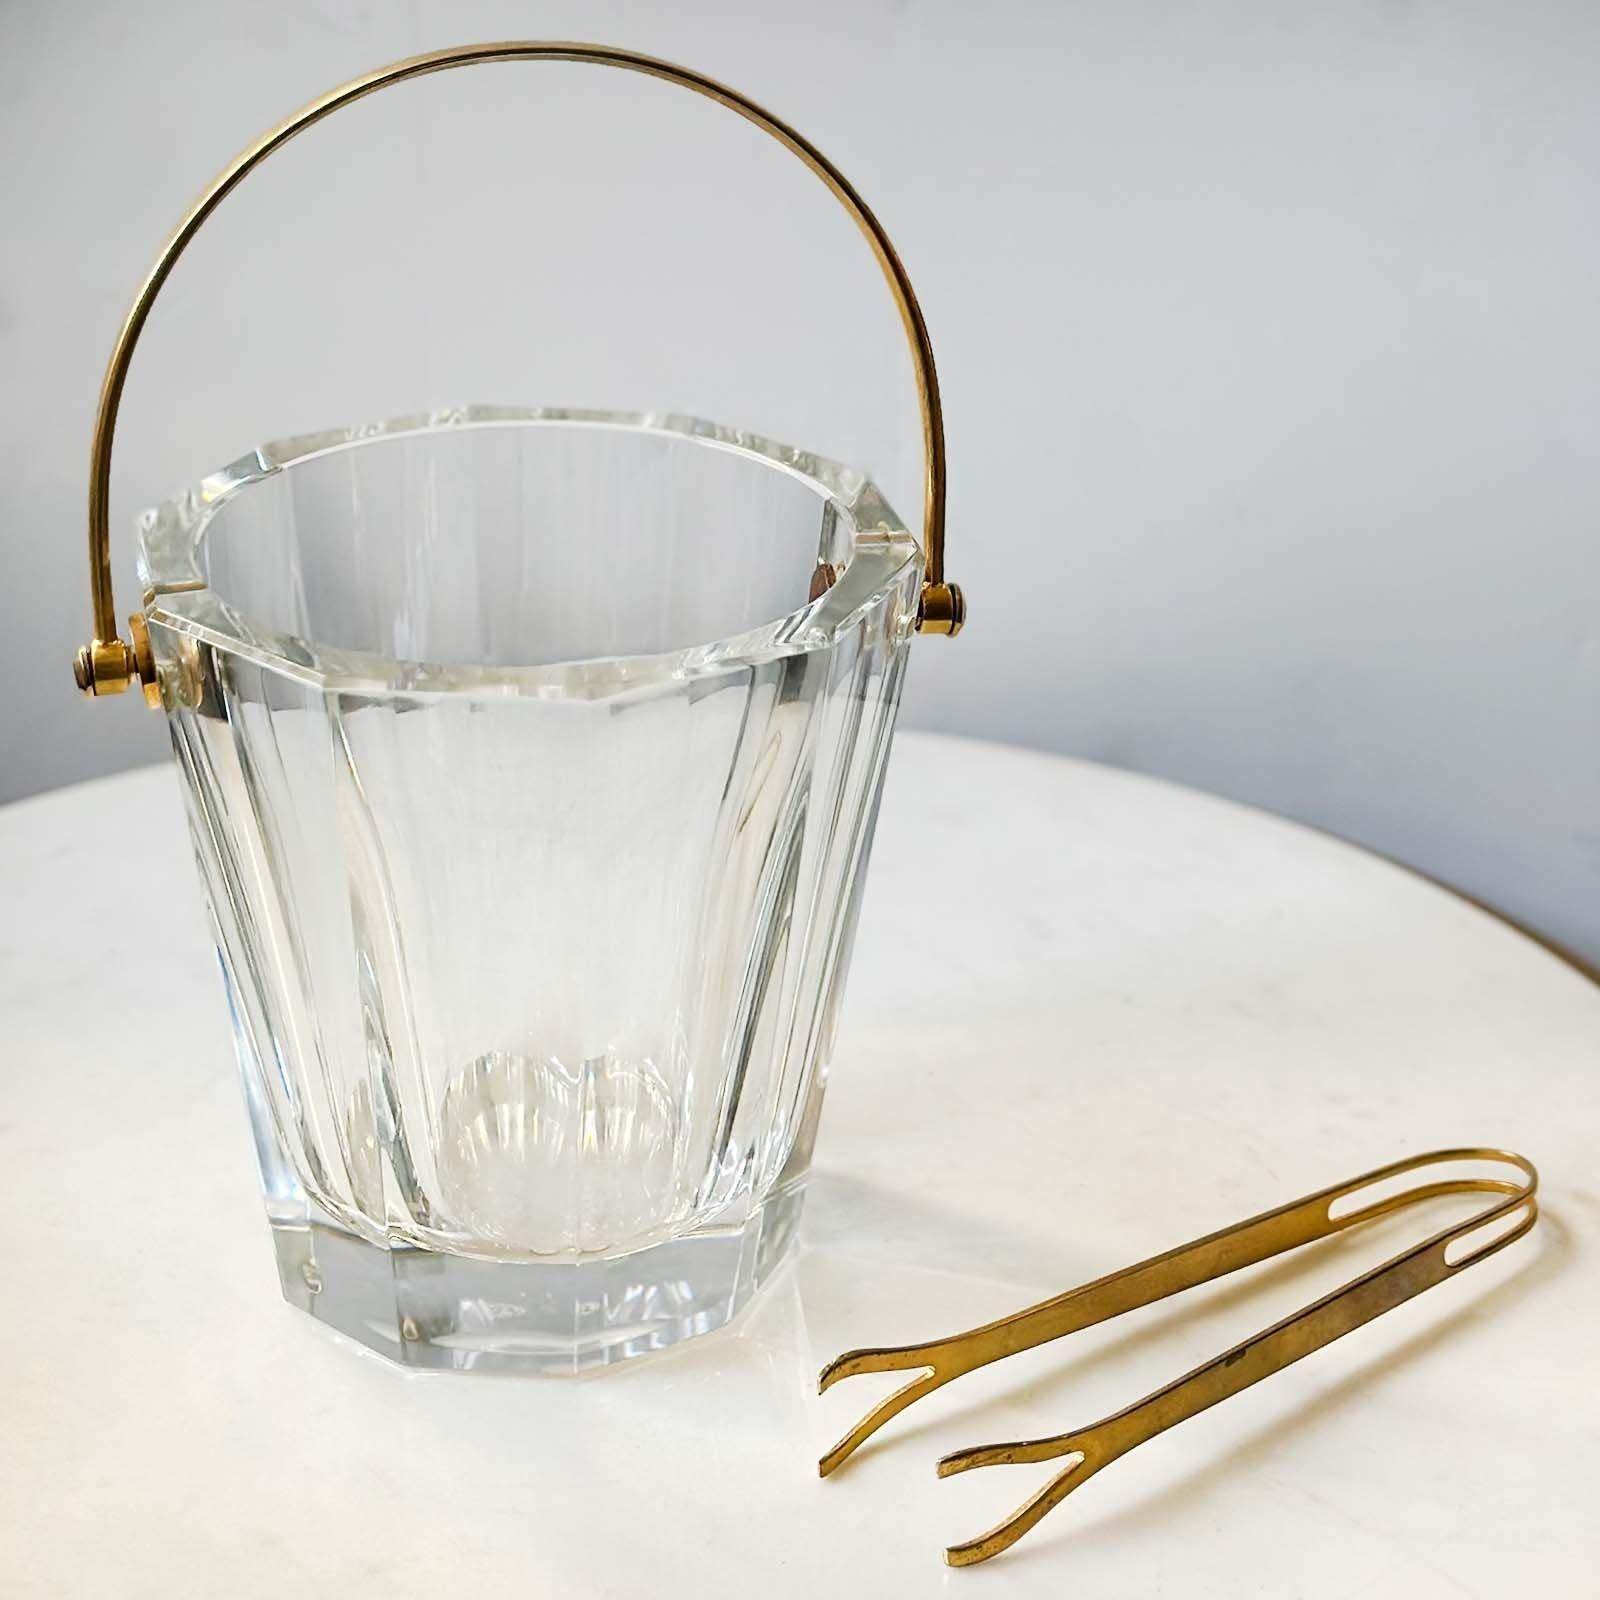 Elegant ice bucket made of rich cut crystal and a gold-plated metal handle by Baccarat, France; followed by a matching ice tong. Made in the 20th Century. The makers mark is etched on the base of the piece.
Dimensions:
9.5